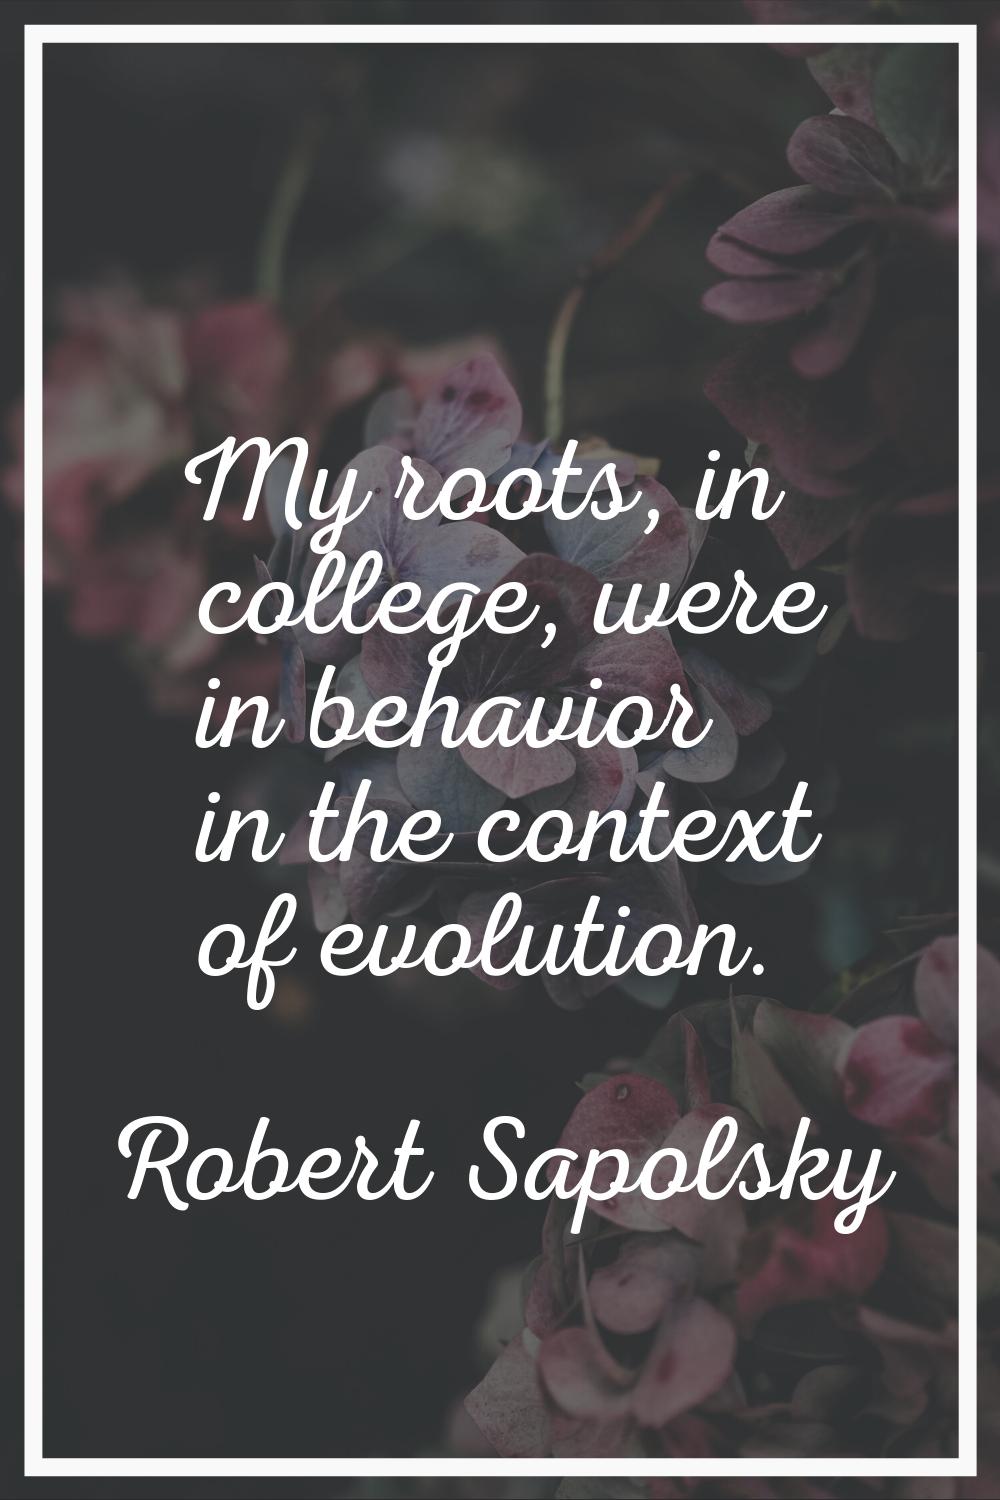 My roots, in college, were in behavior in the context of evolution.